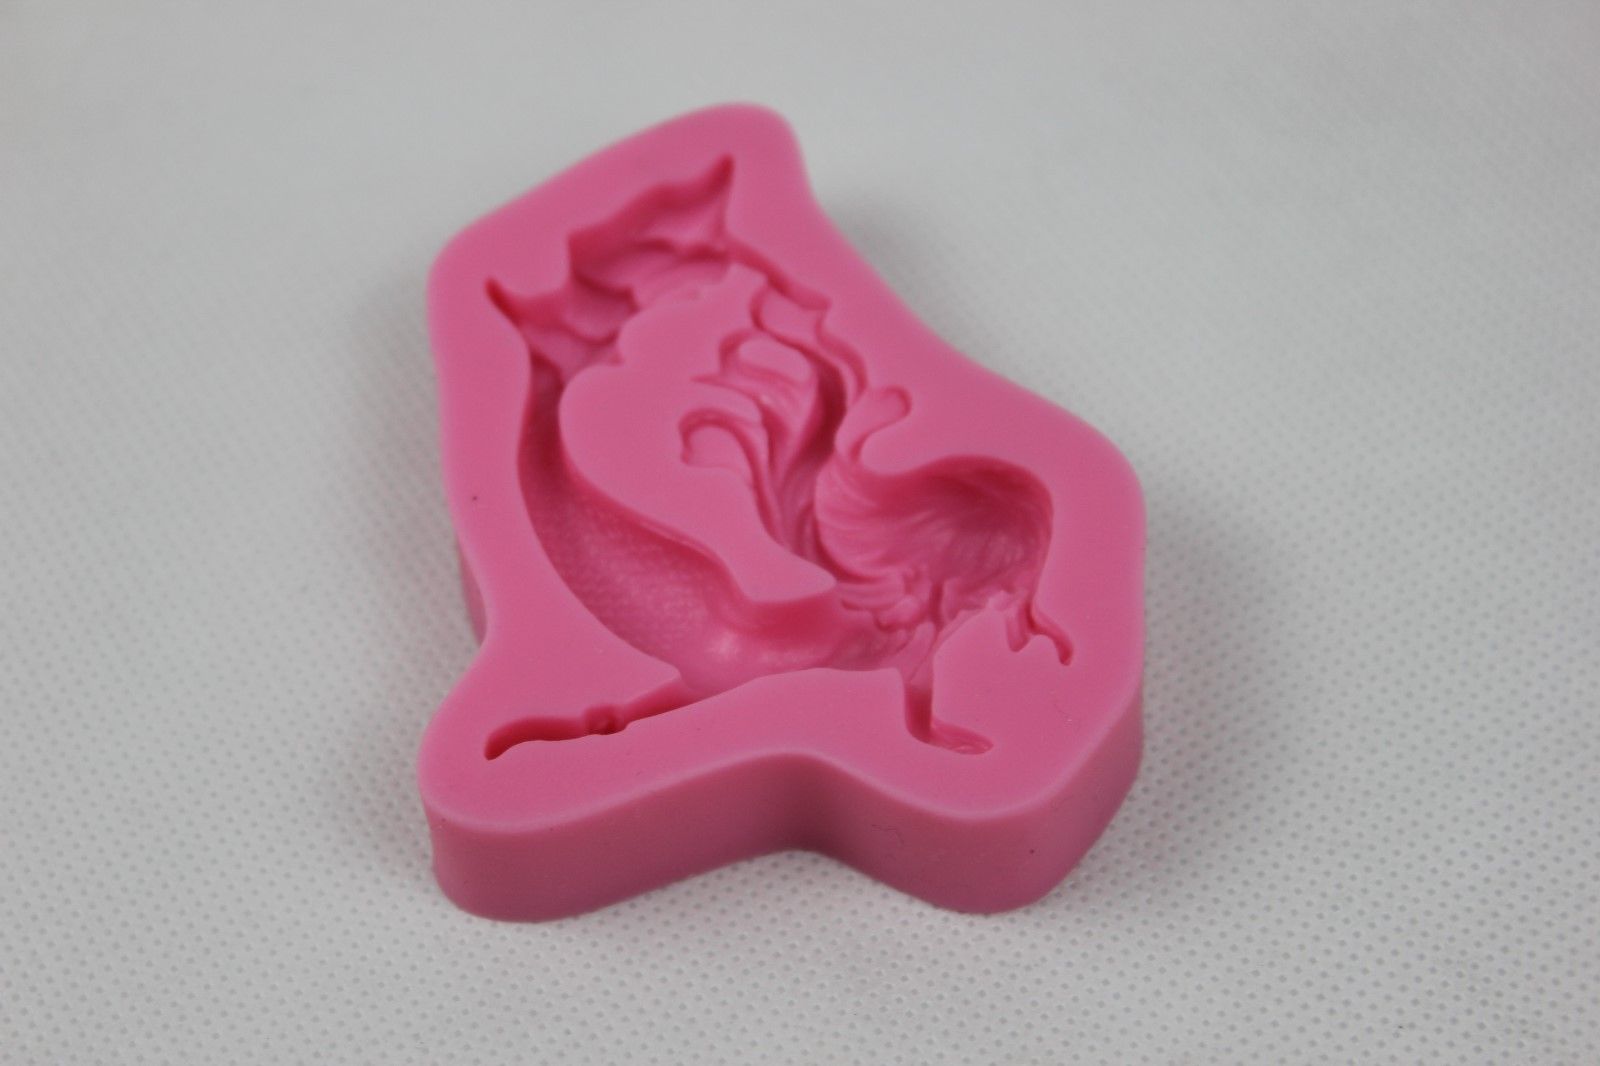 attachment-https://www.cupcakeaddicts.co.uk/wp-content/uploads/imported/3/Mermaid-Silicone-Mould-Fairy-Cup-Cake-Icing-Baking-Decorating-Birthday-Toppers-323163245923-3.jpg